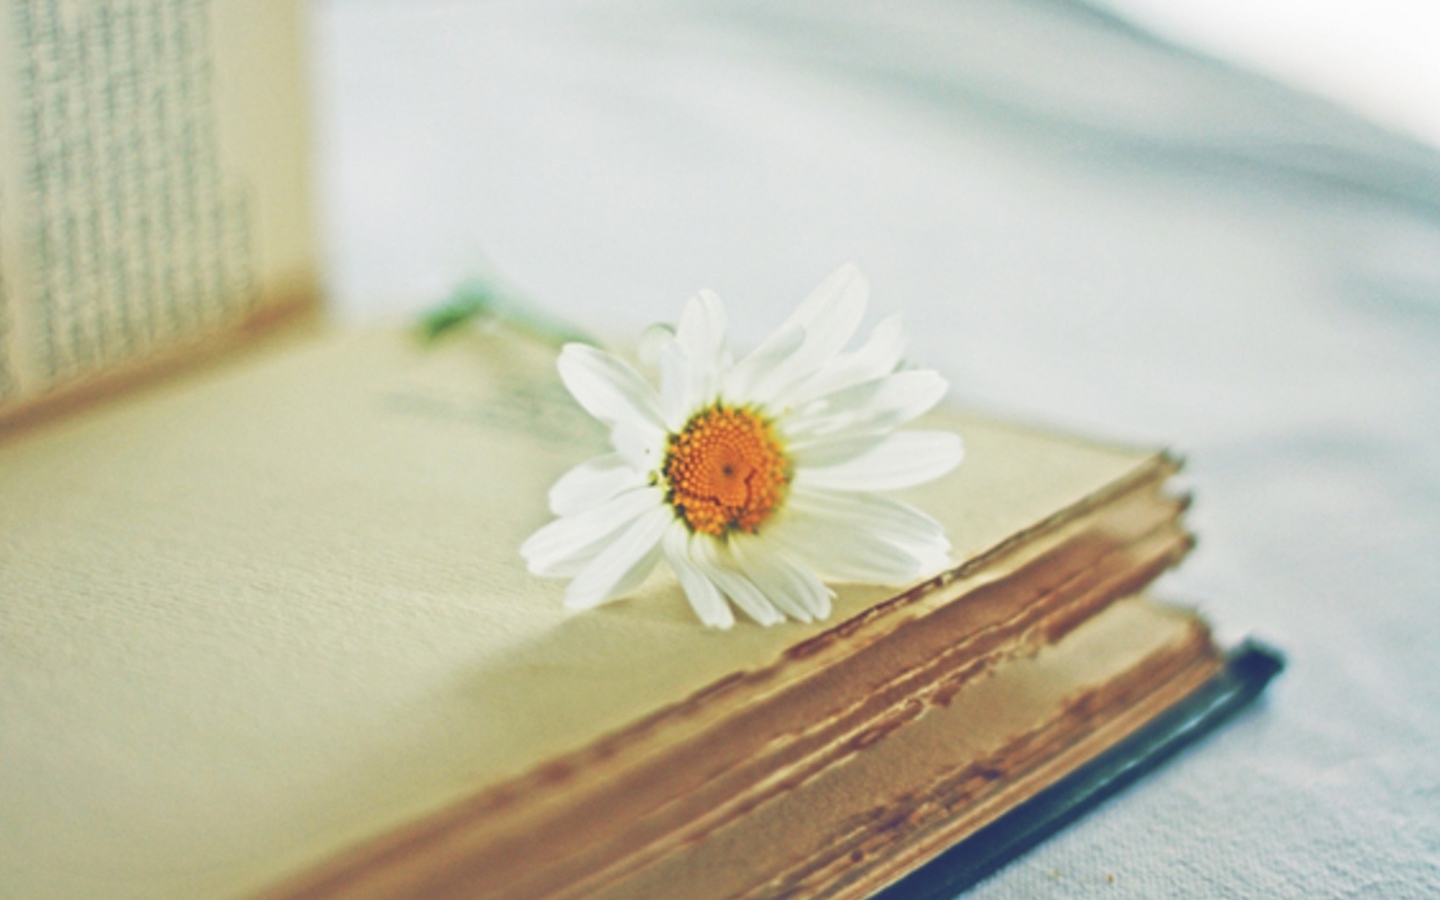 Book And Daisy wallpaper 1440x900